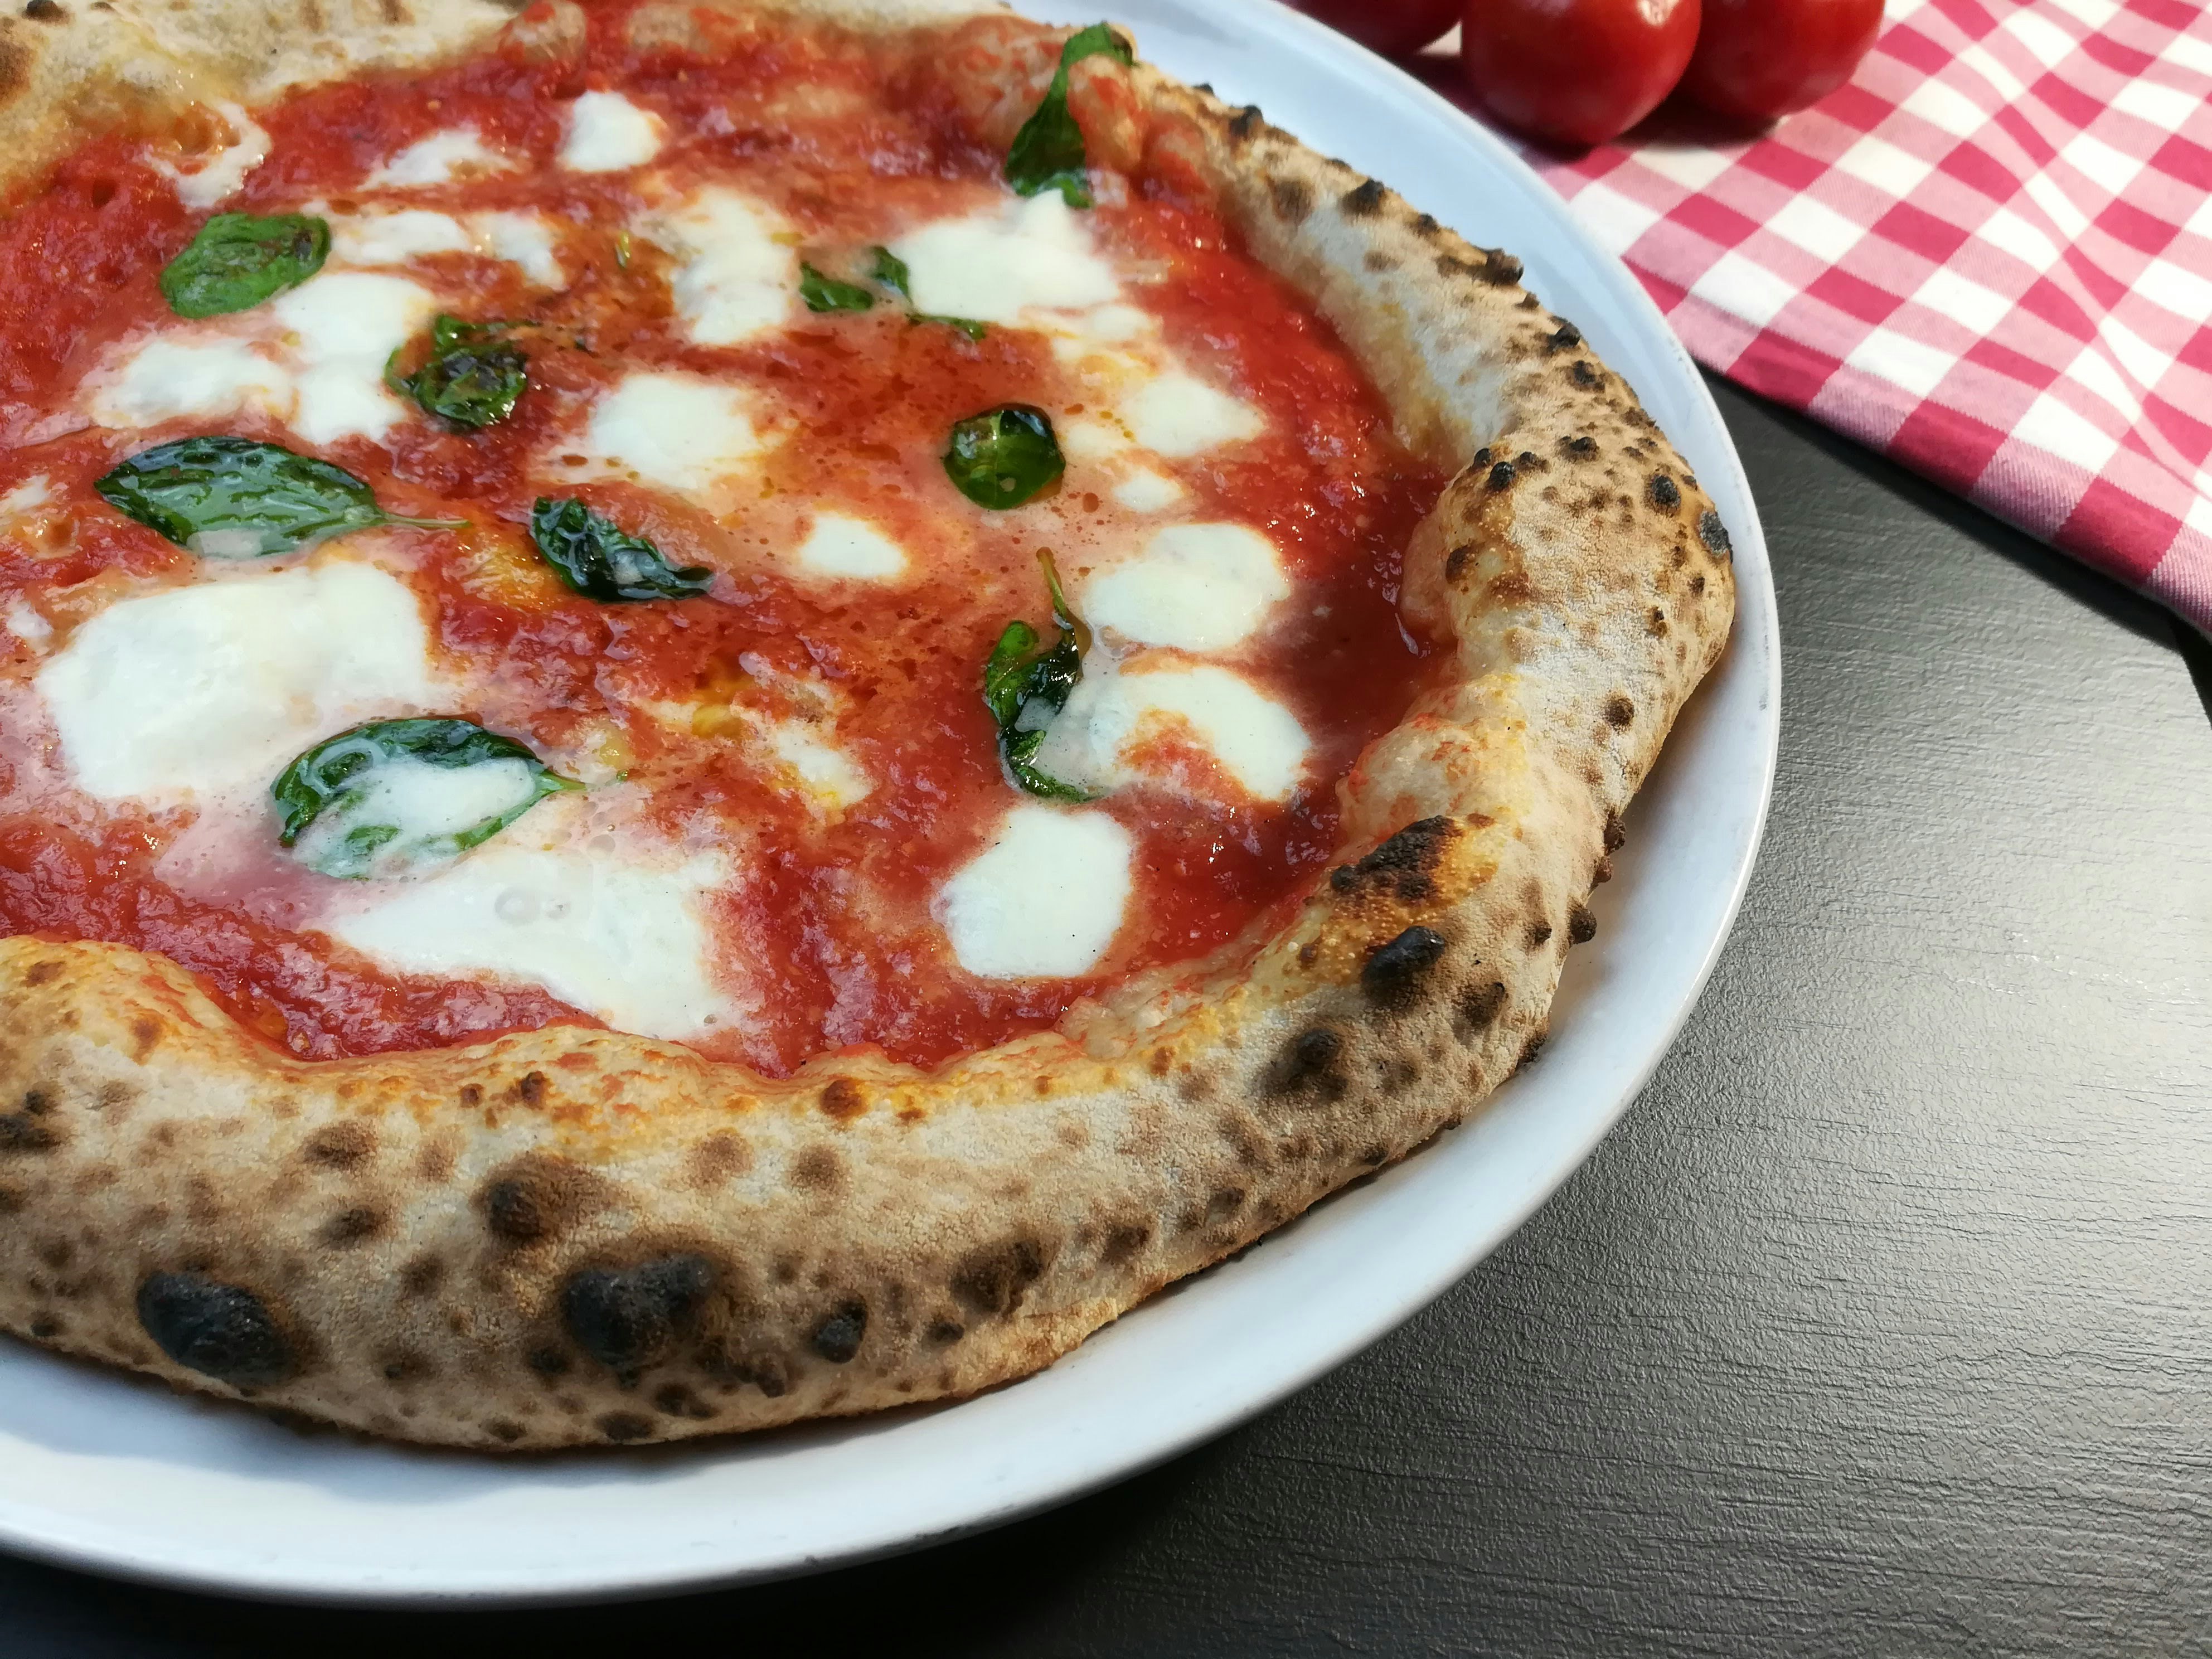 A close-up of Neapolitan pizza